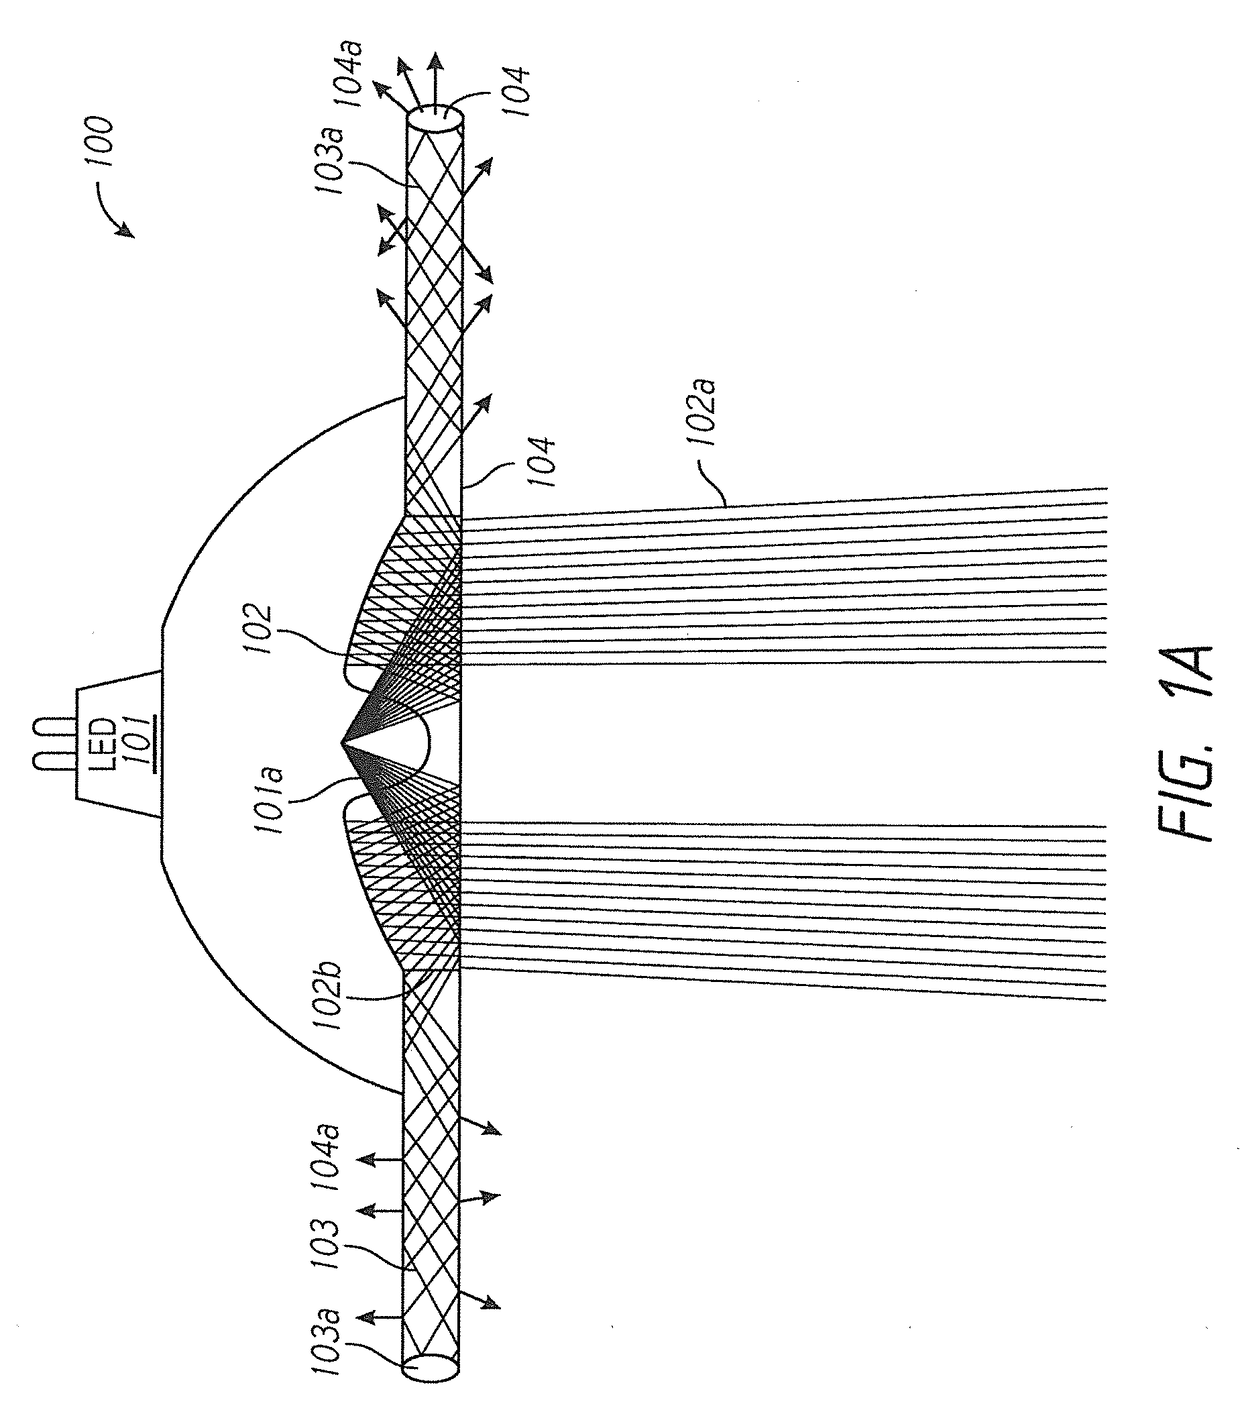 Luminaire for emitting directional and non-directional light